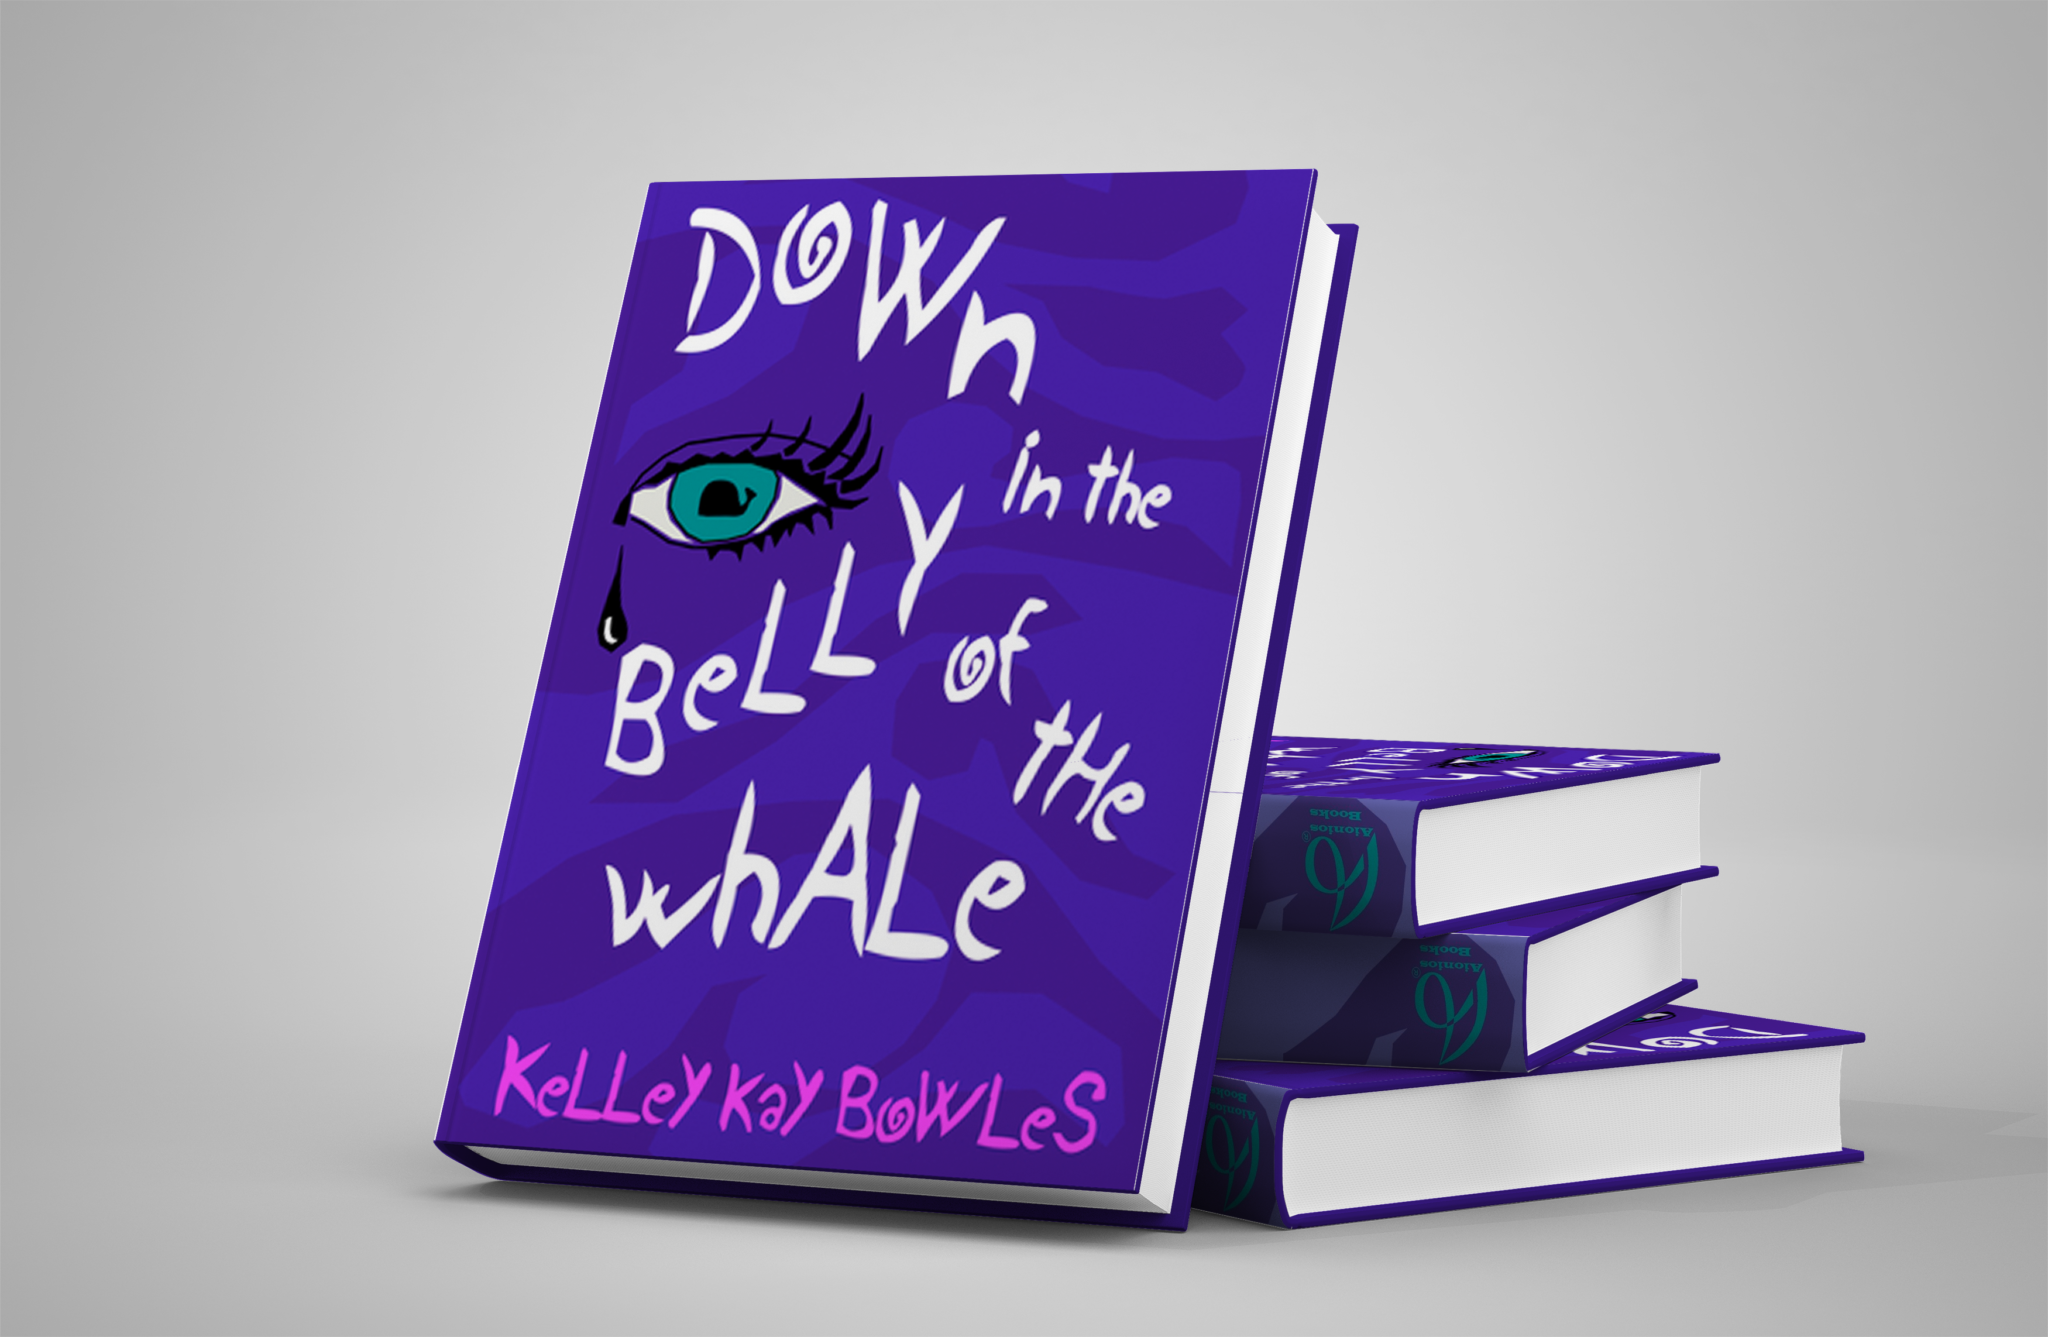 Review: Down in the Belly of The Whale